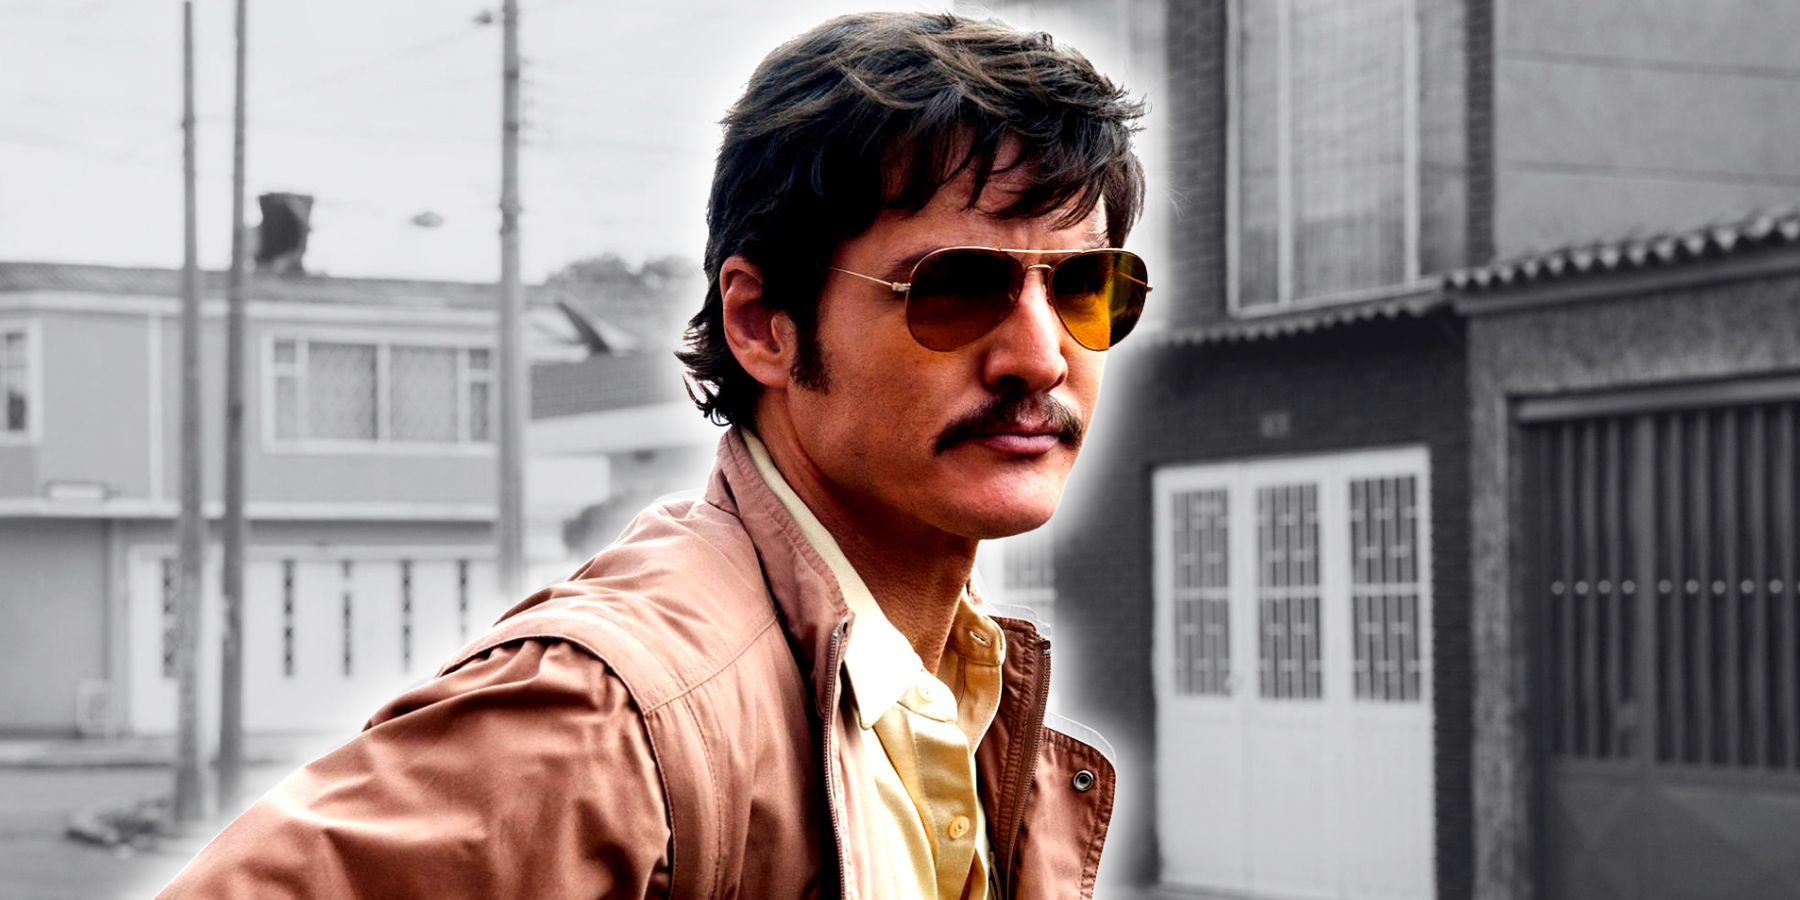 Pedro Pascal wearing sunglasses in Narcos